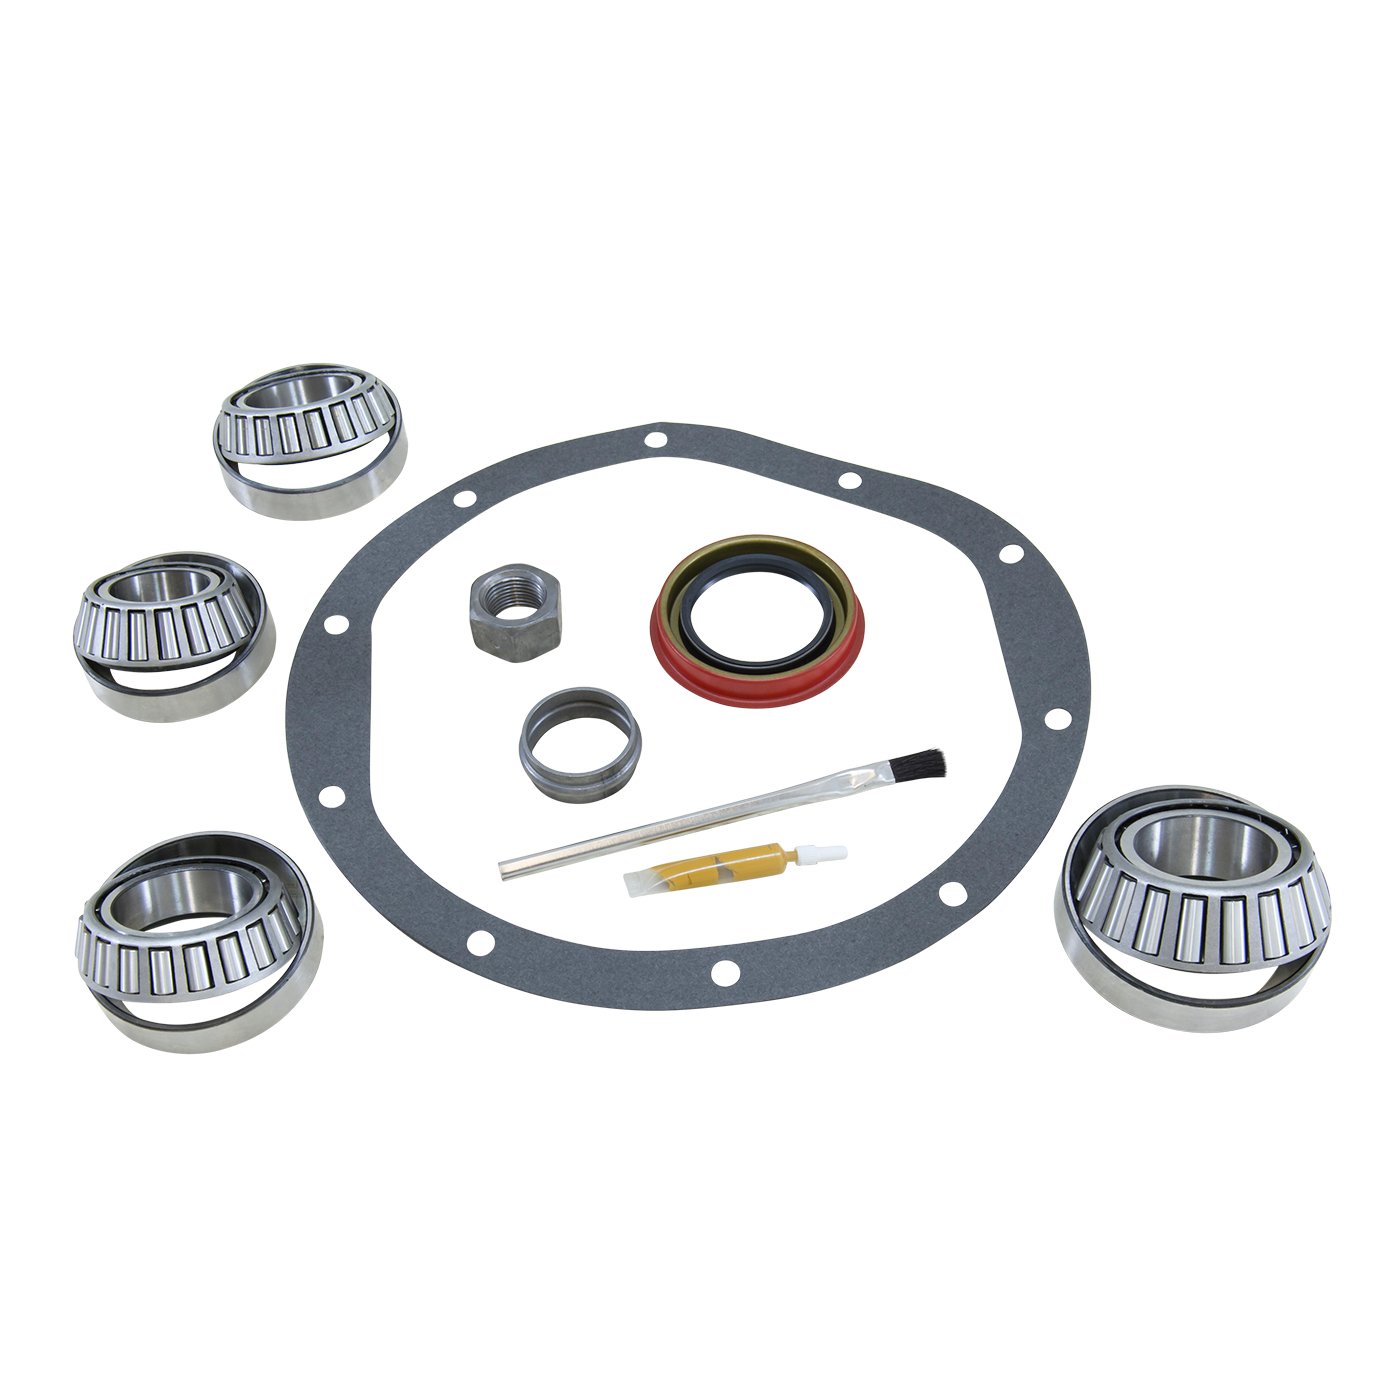 Bearing Installation Kit For GM 8.5" HD Front Differential With Aftermarket Positraction